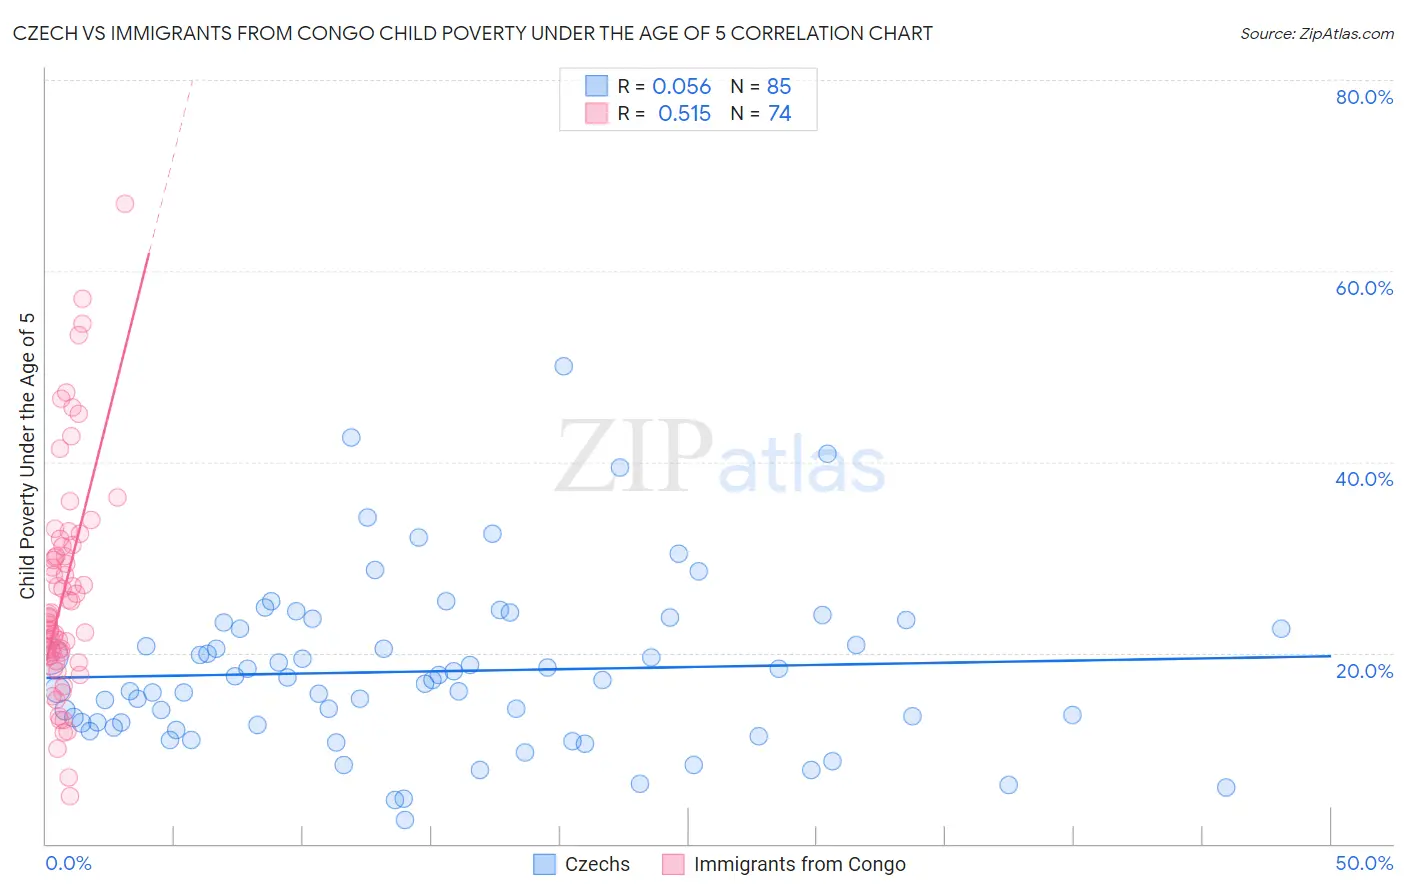 Czech vs Immigrants from Congo Child Poverty Under the Age of 5